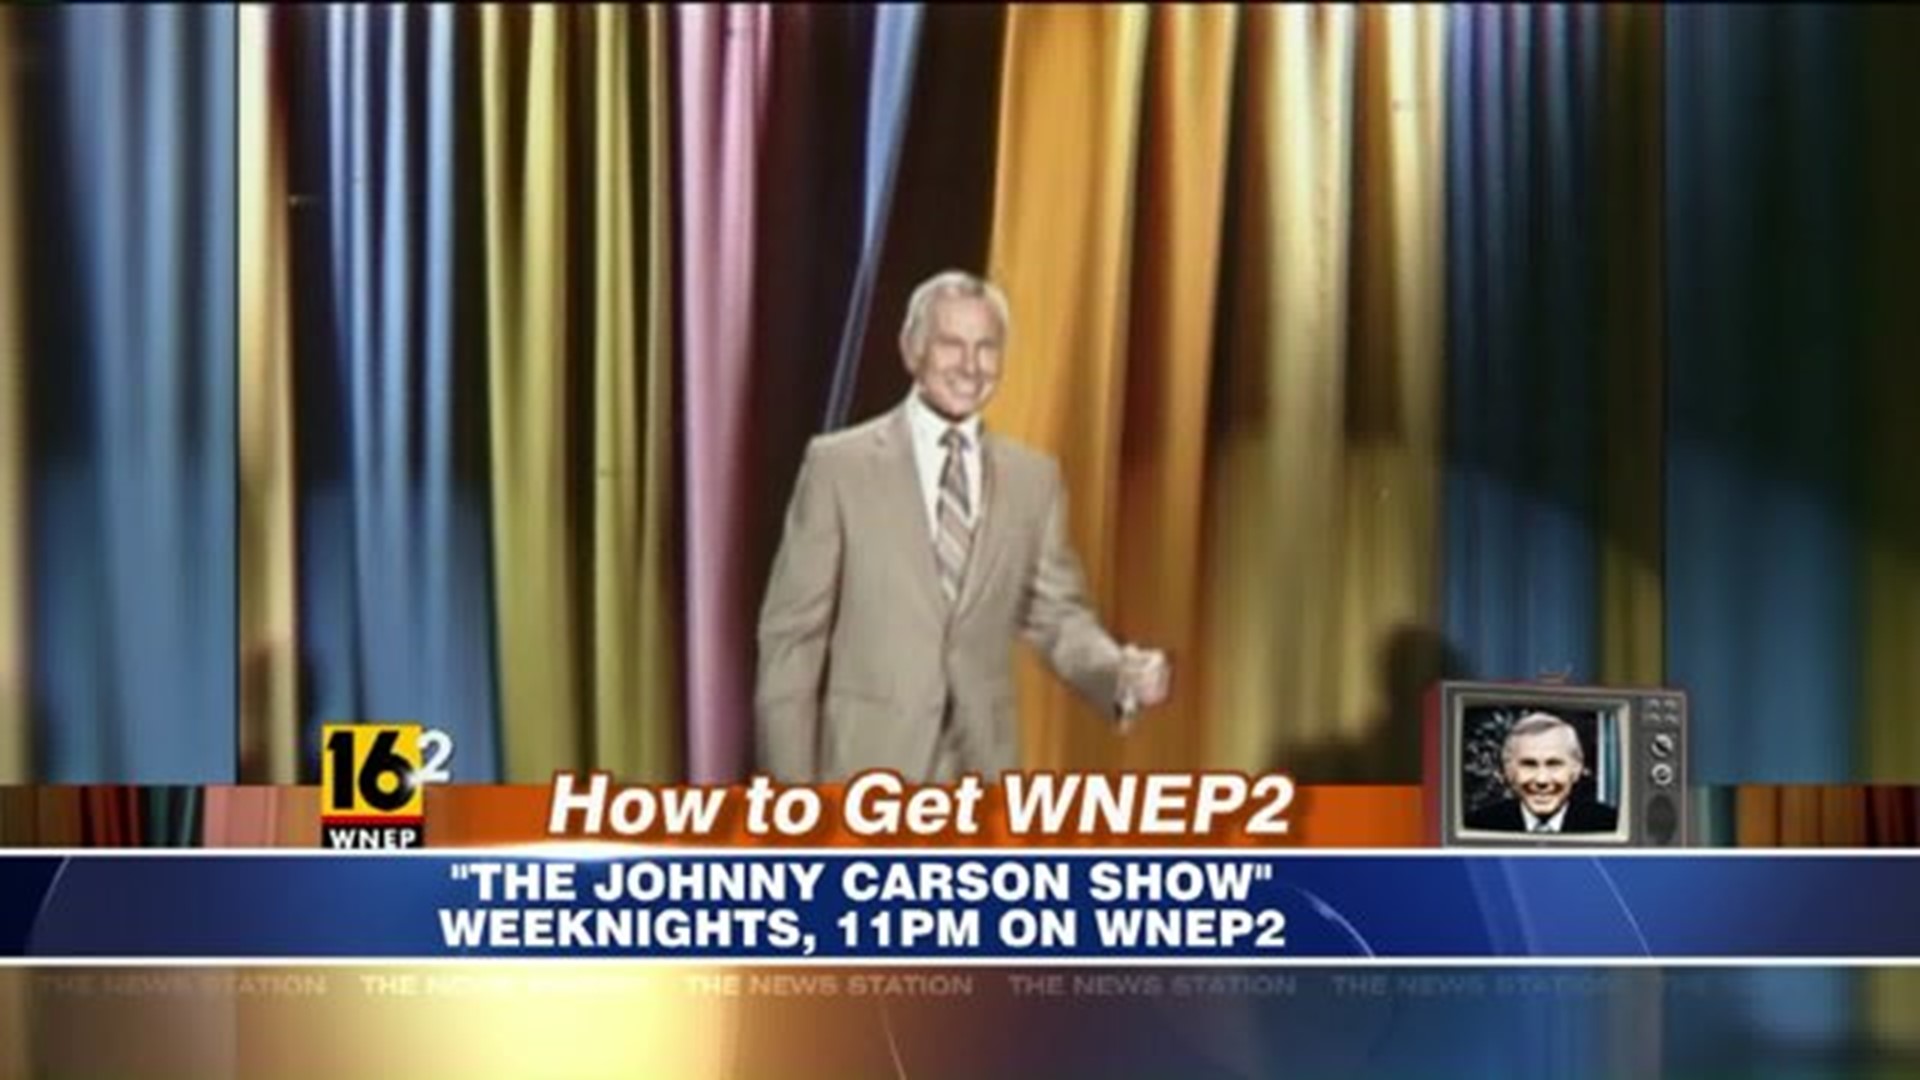 How To Watch "Johnny Carson" on WNEP 2